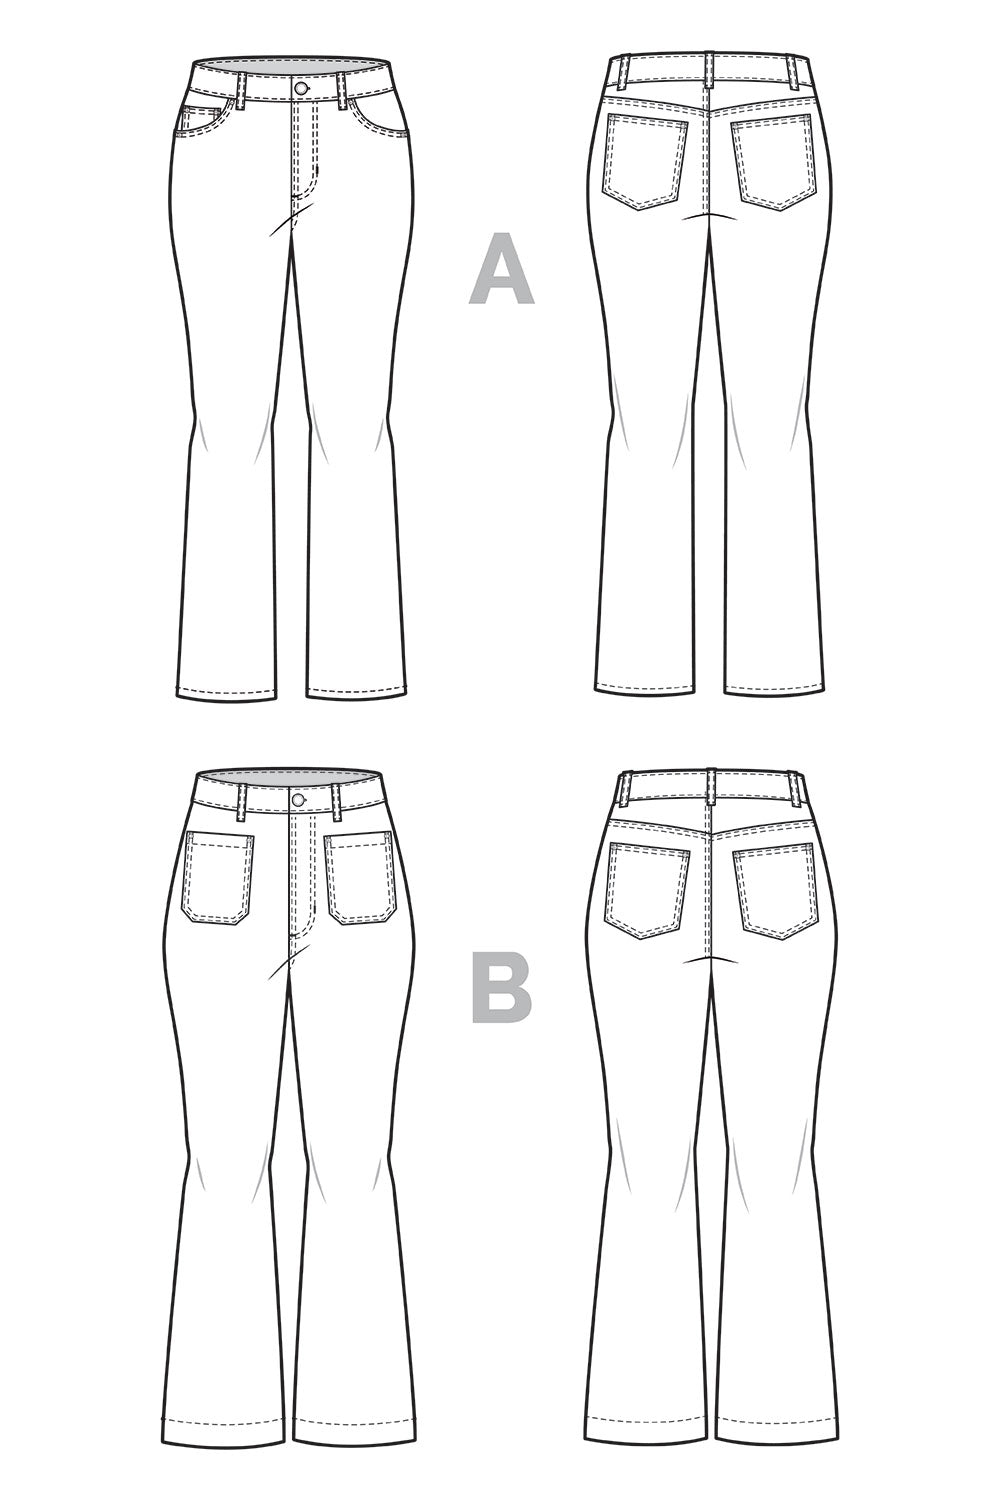 Jude Jeans | View A - Bootcut and View B - Flare Jeans Pattern | Closet Core Patterns